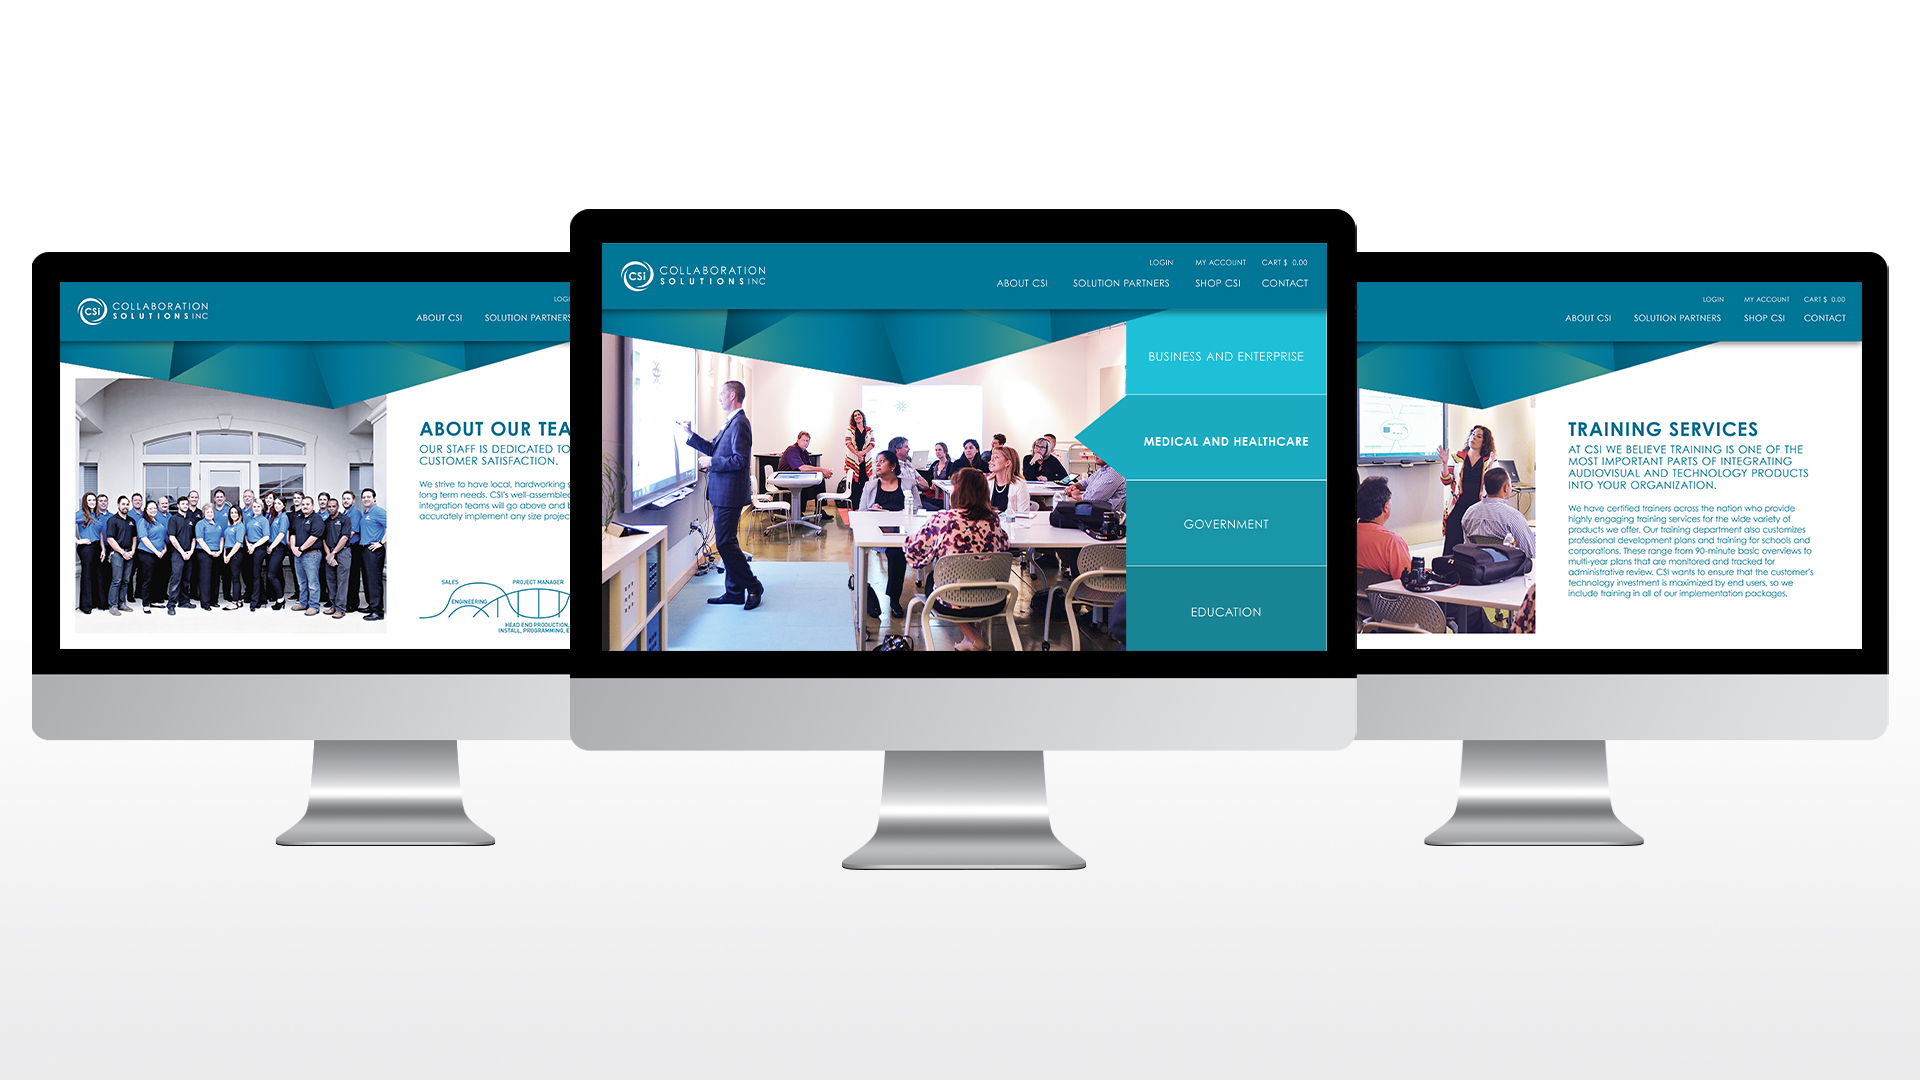 Collaboration Solutions website page designs on 3 separate iMac screens